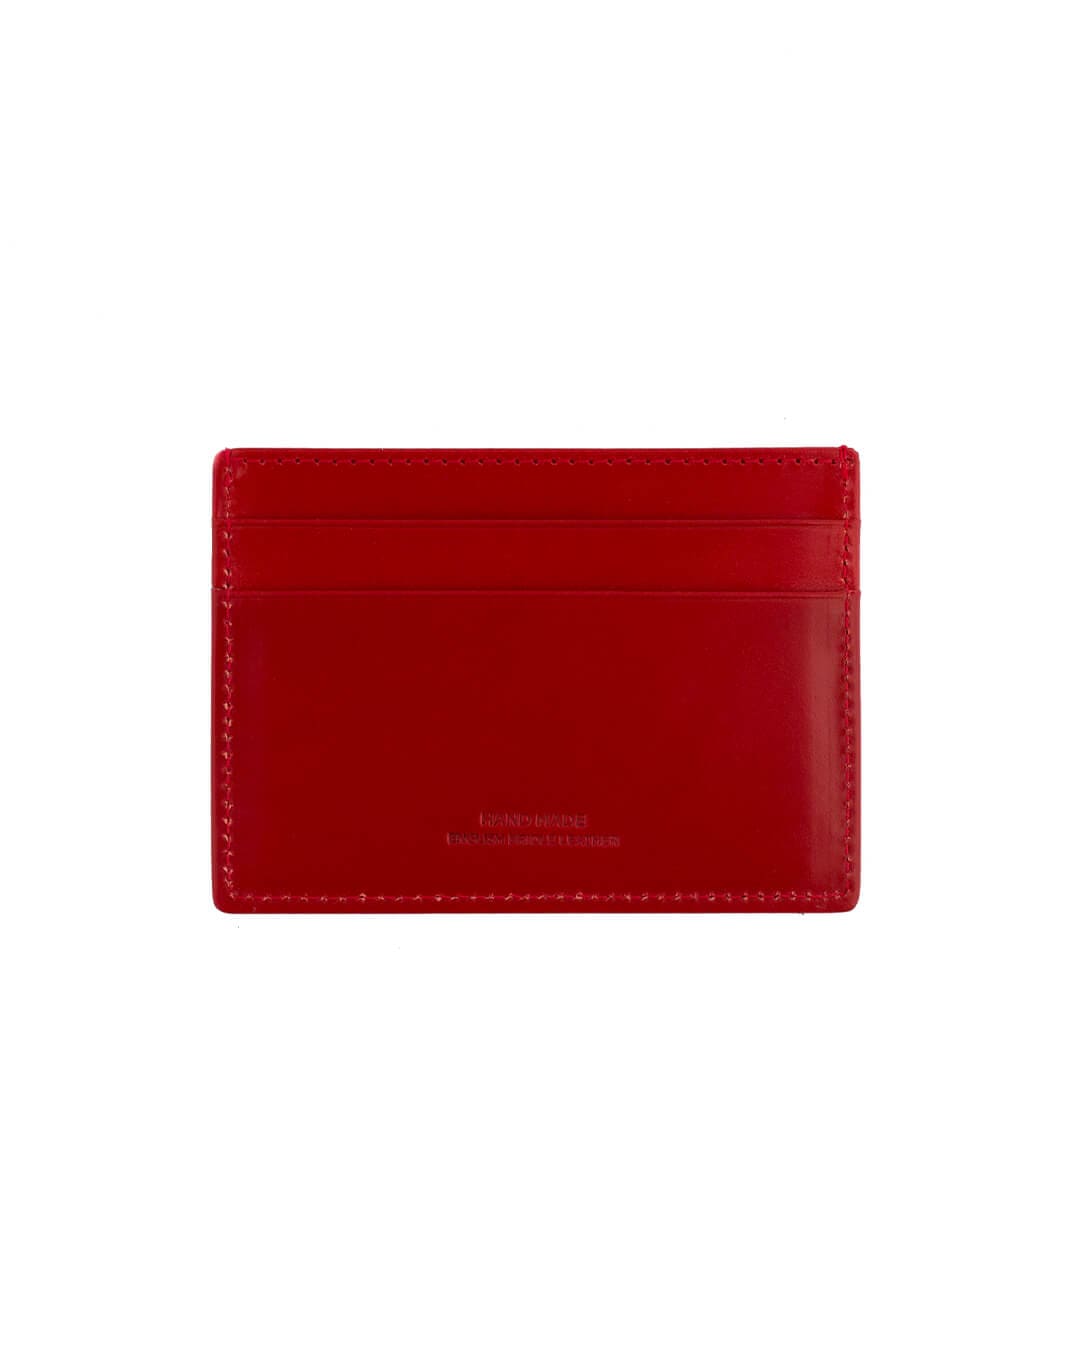 Cavesson&#39;s Wallets Cavesson&#39;s Red Card Case